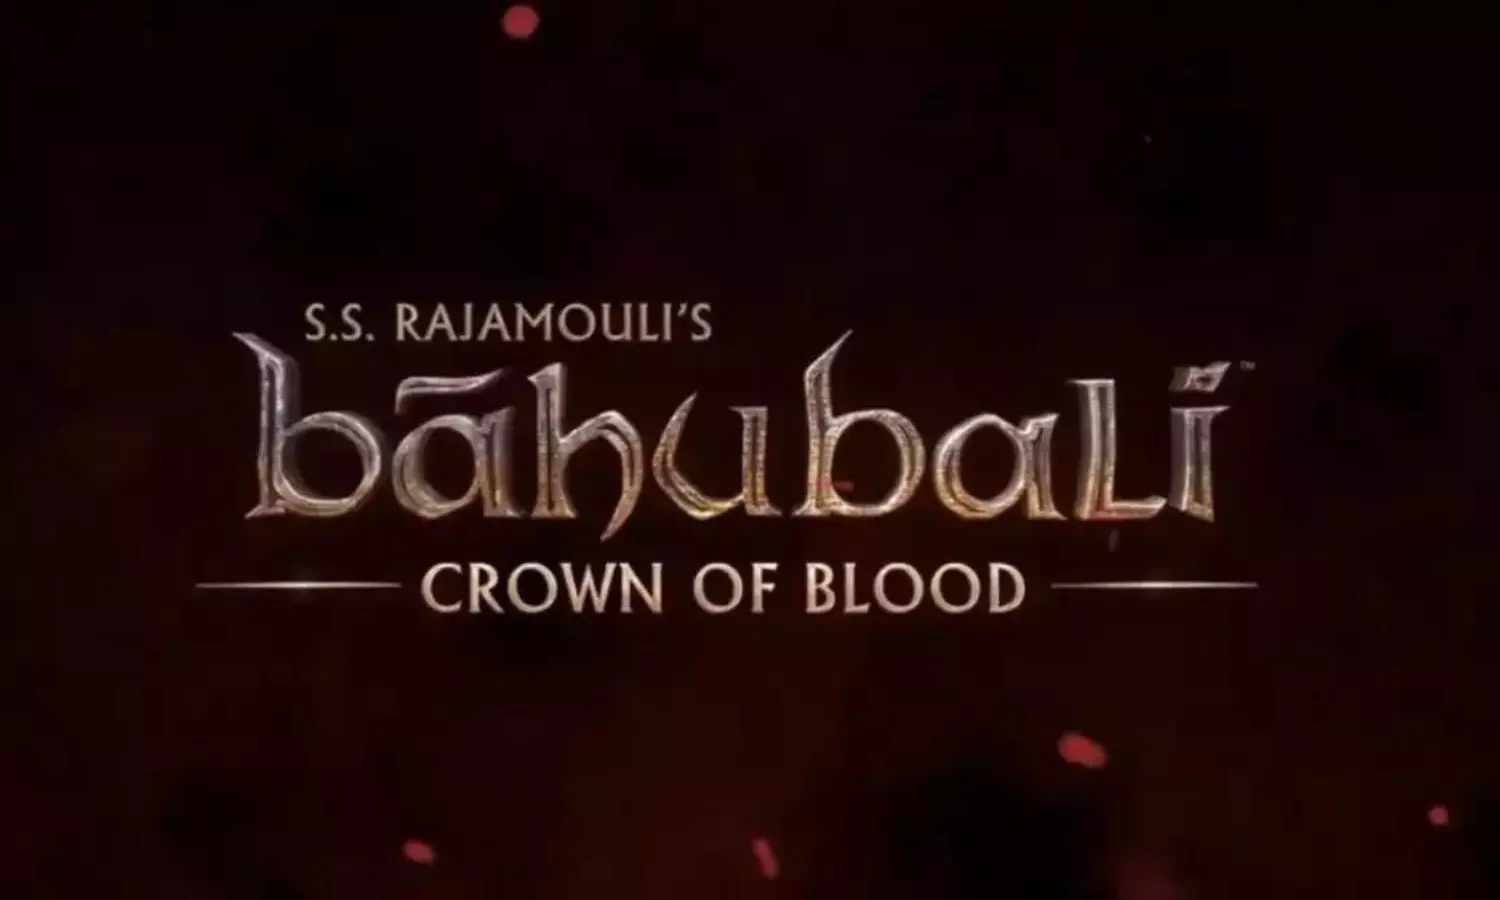 Baahubali-Crown of Blood: SS Rajamouli Announces Animated Series, Trailer to Release Soon